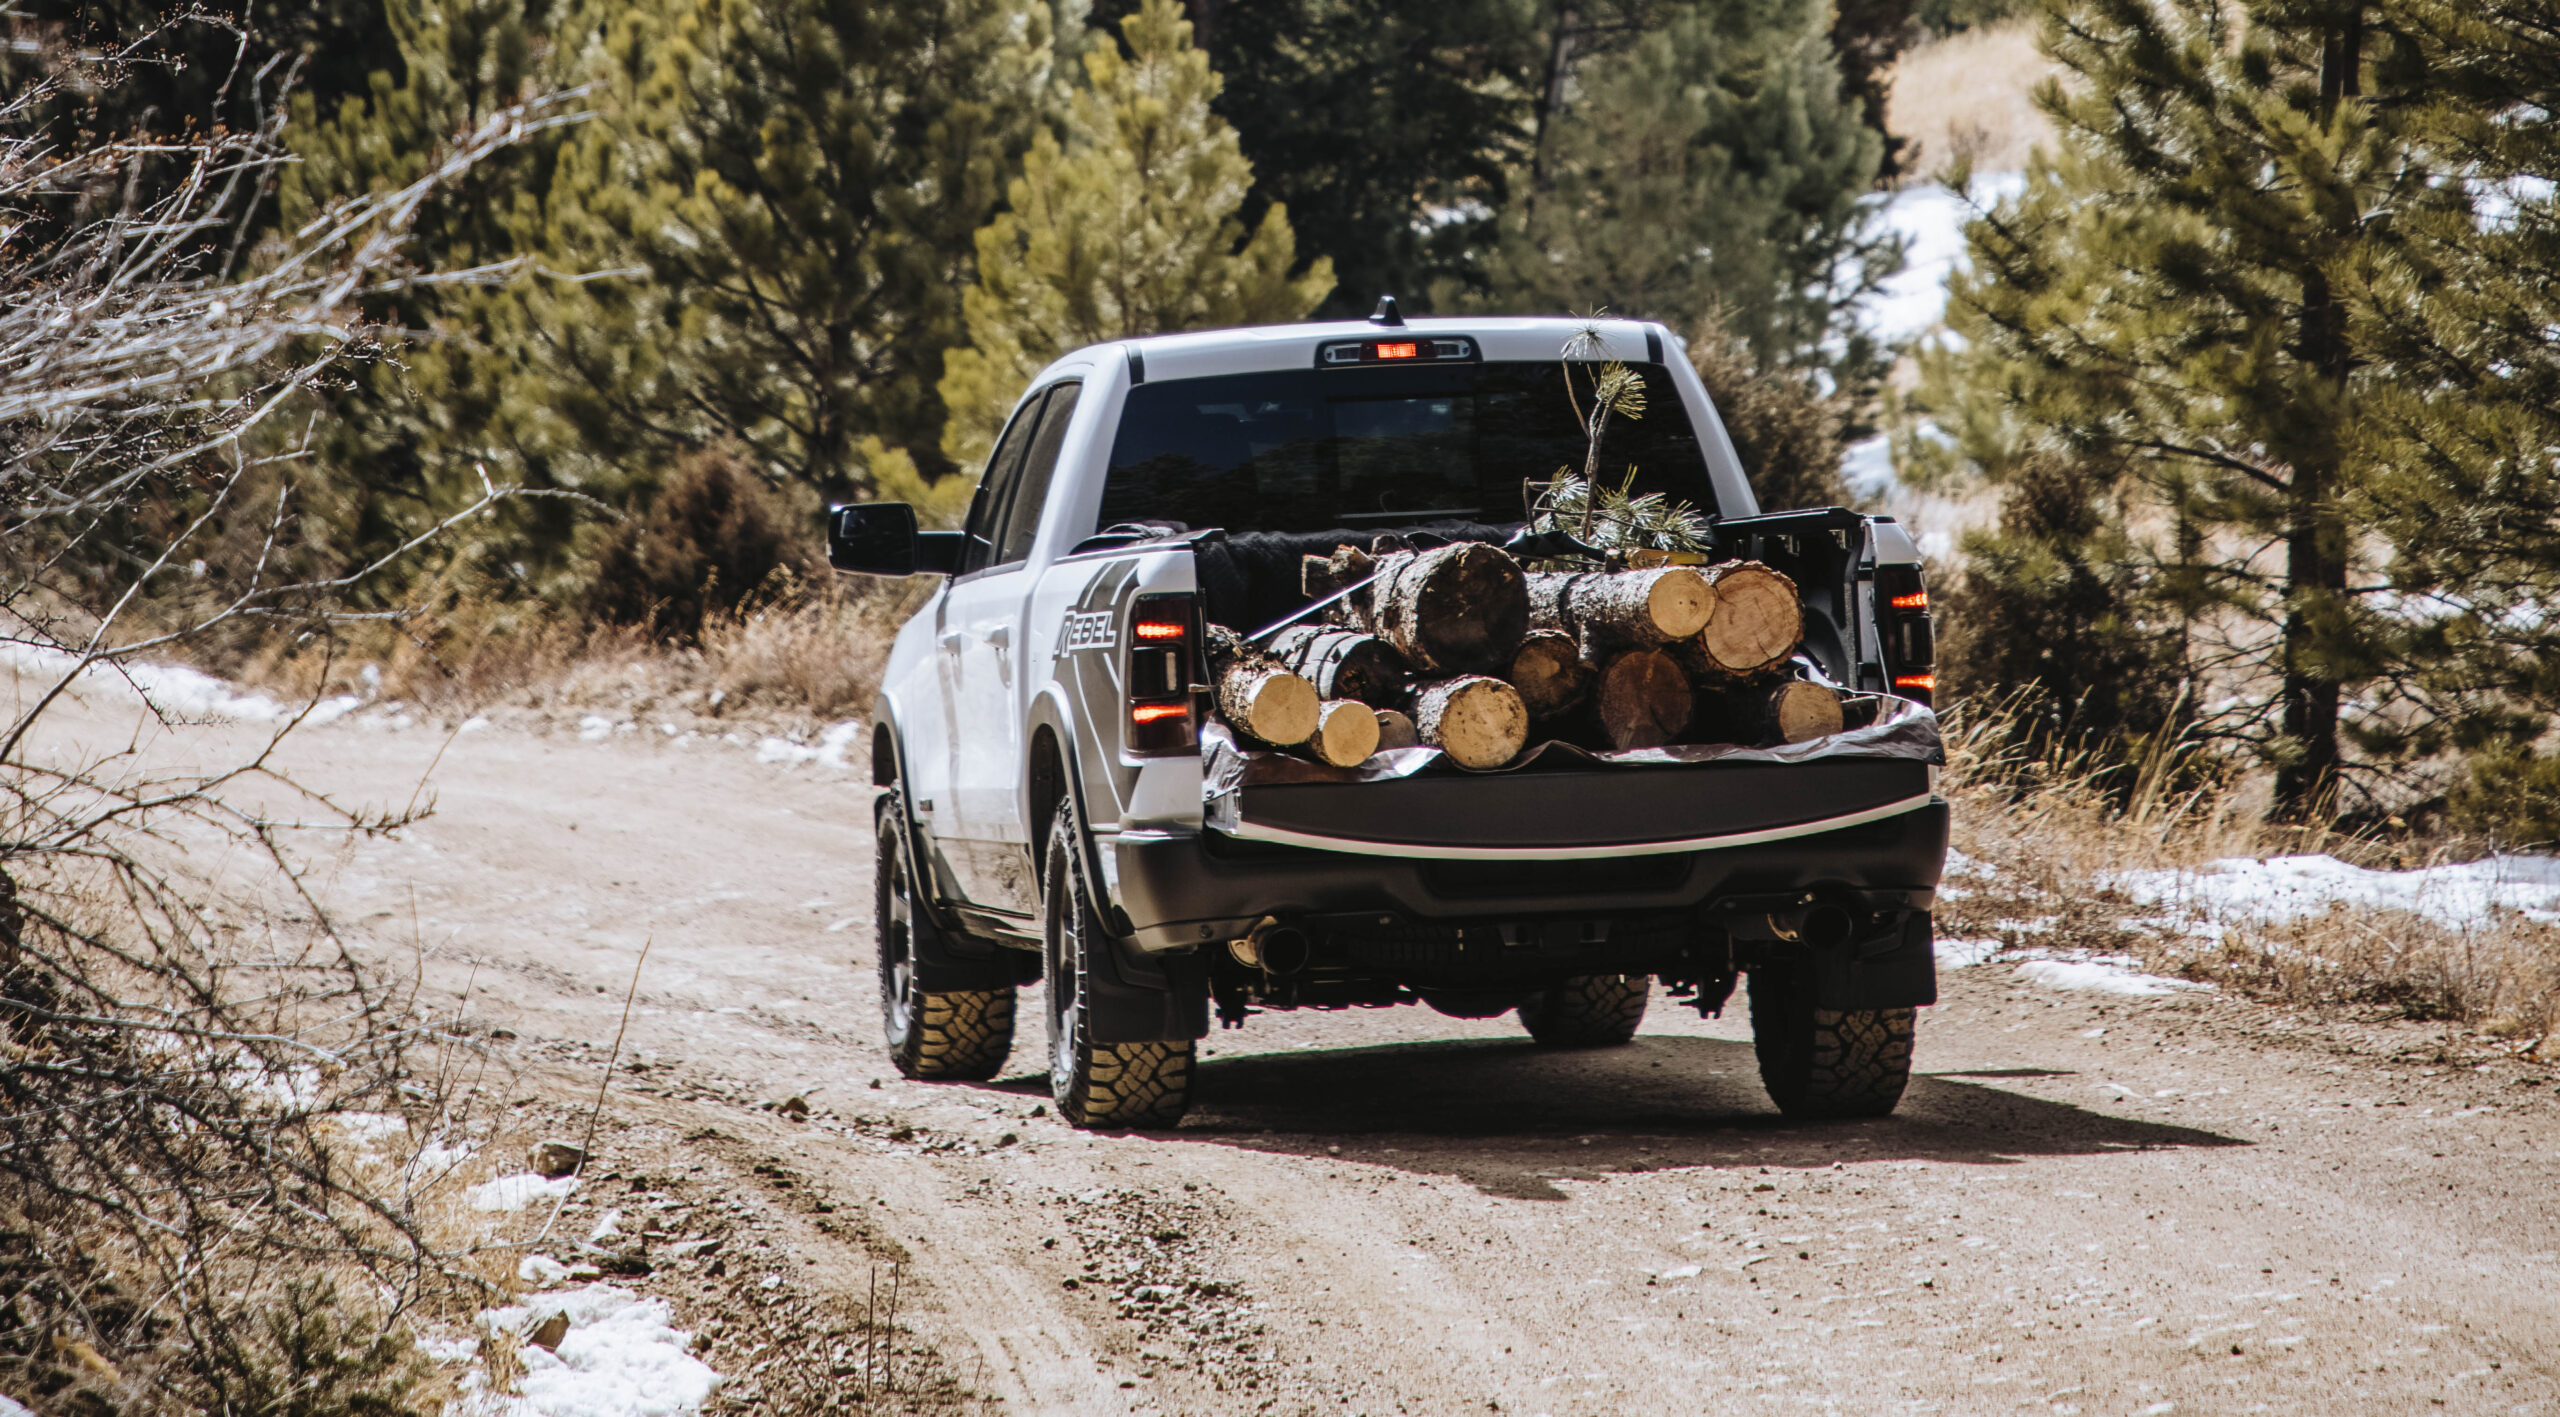 Why Your Customer’s RAM 1500 Needs a Suspension Upgrade | THE SHOP